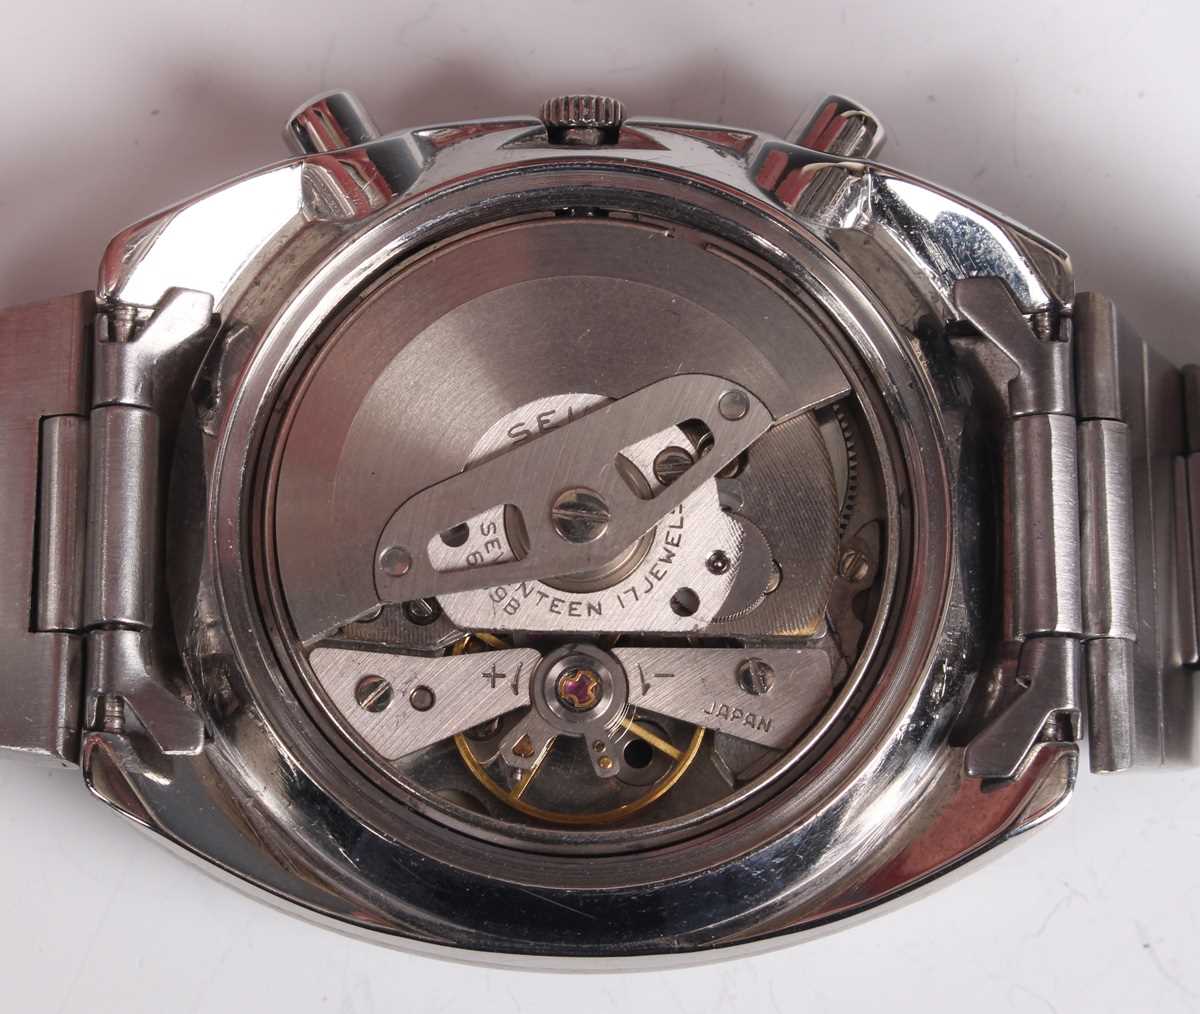 A Seiko Chronograph Automatic stainless steel gentleman's bracelet wristwatch, Ref. 6139-6012, circa - Image 3 of 8